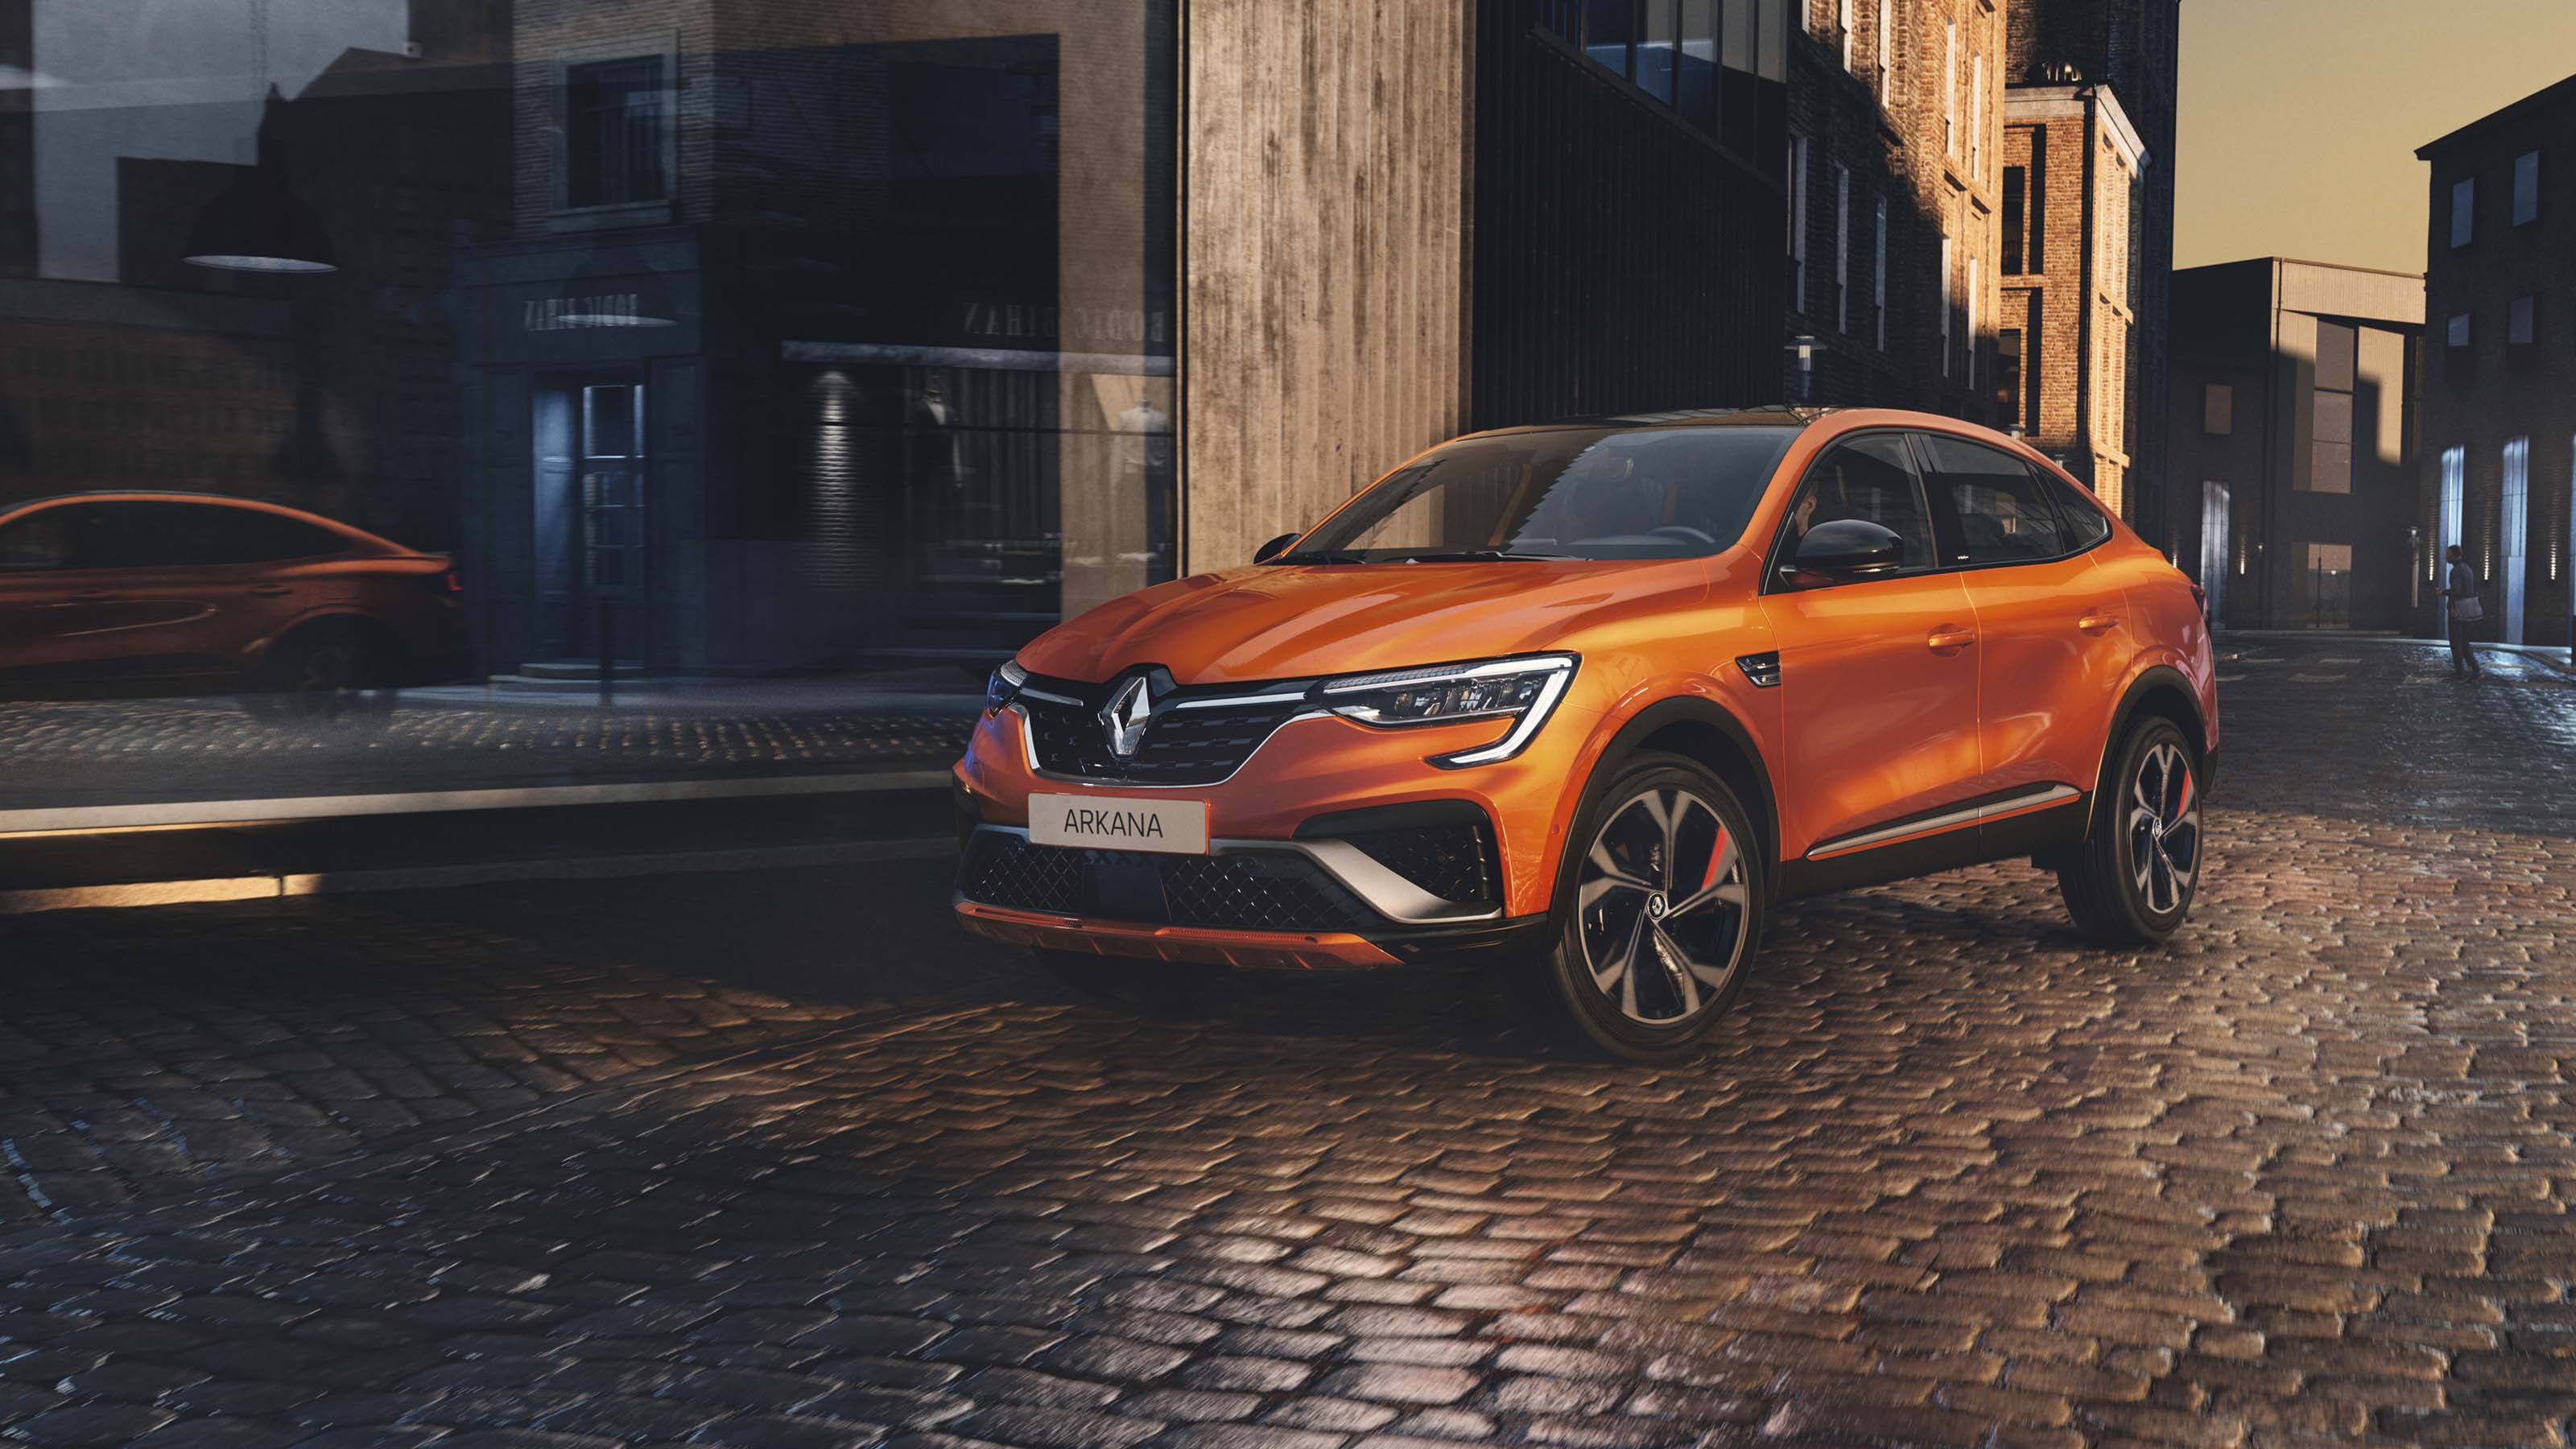 New 2021 Renault Arkana E-TECH hybrid: specs, prices and on-sale date